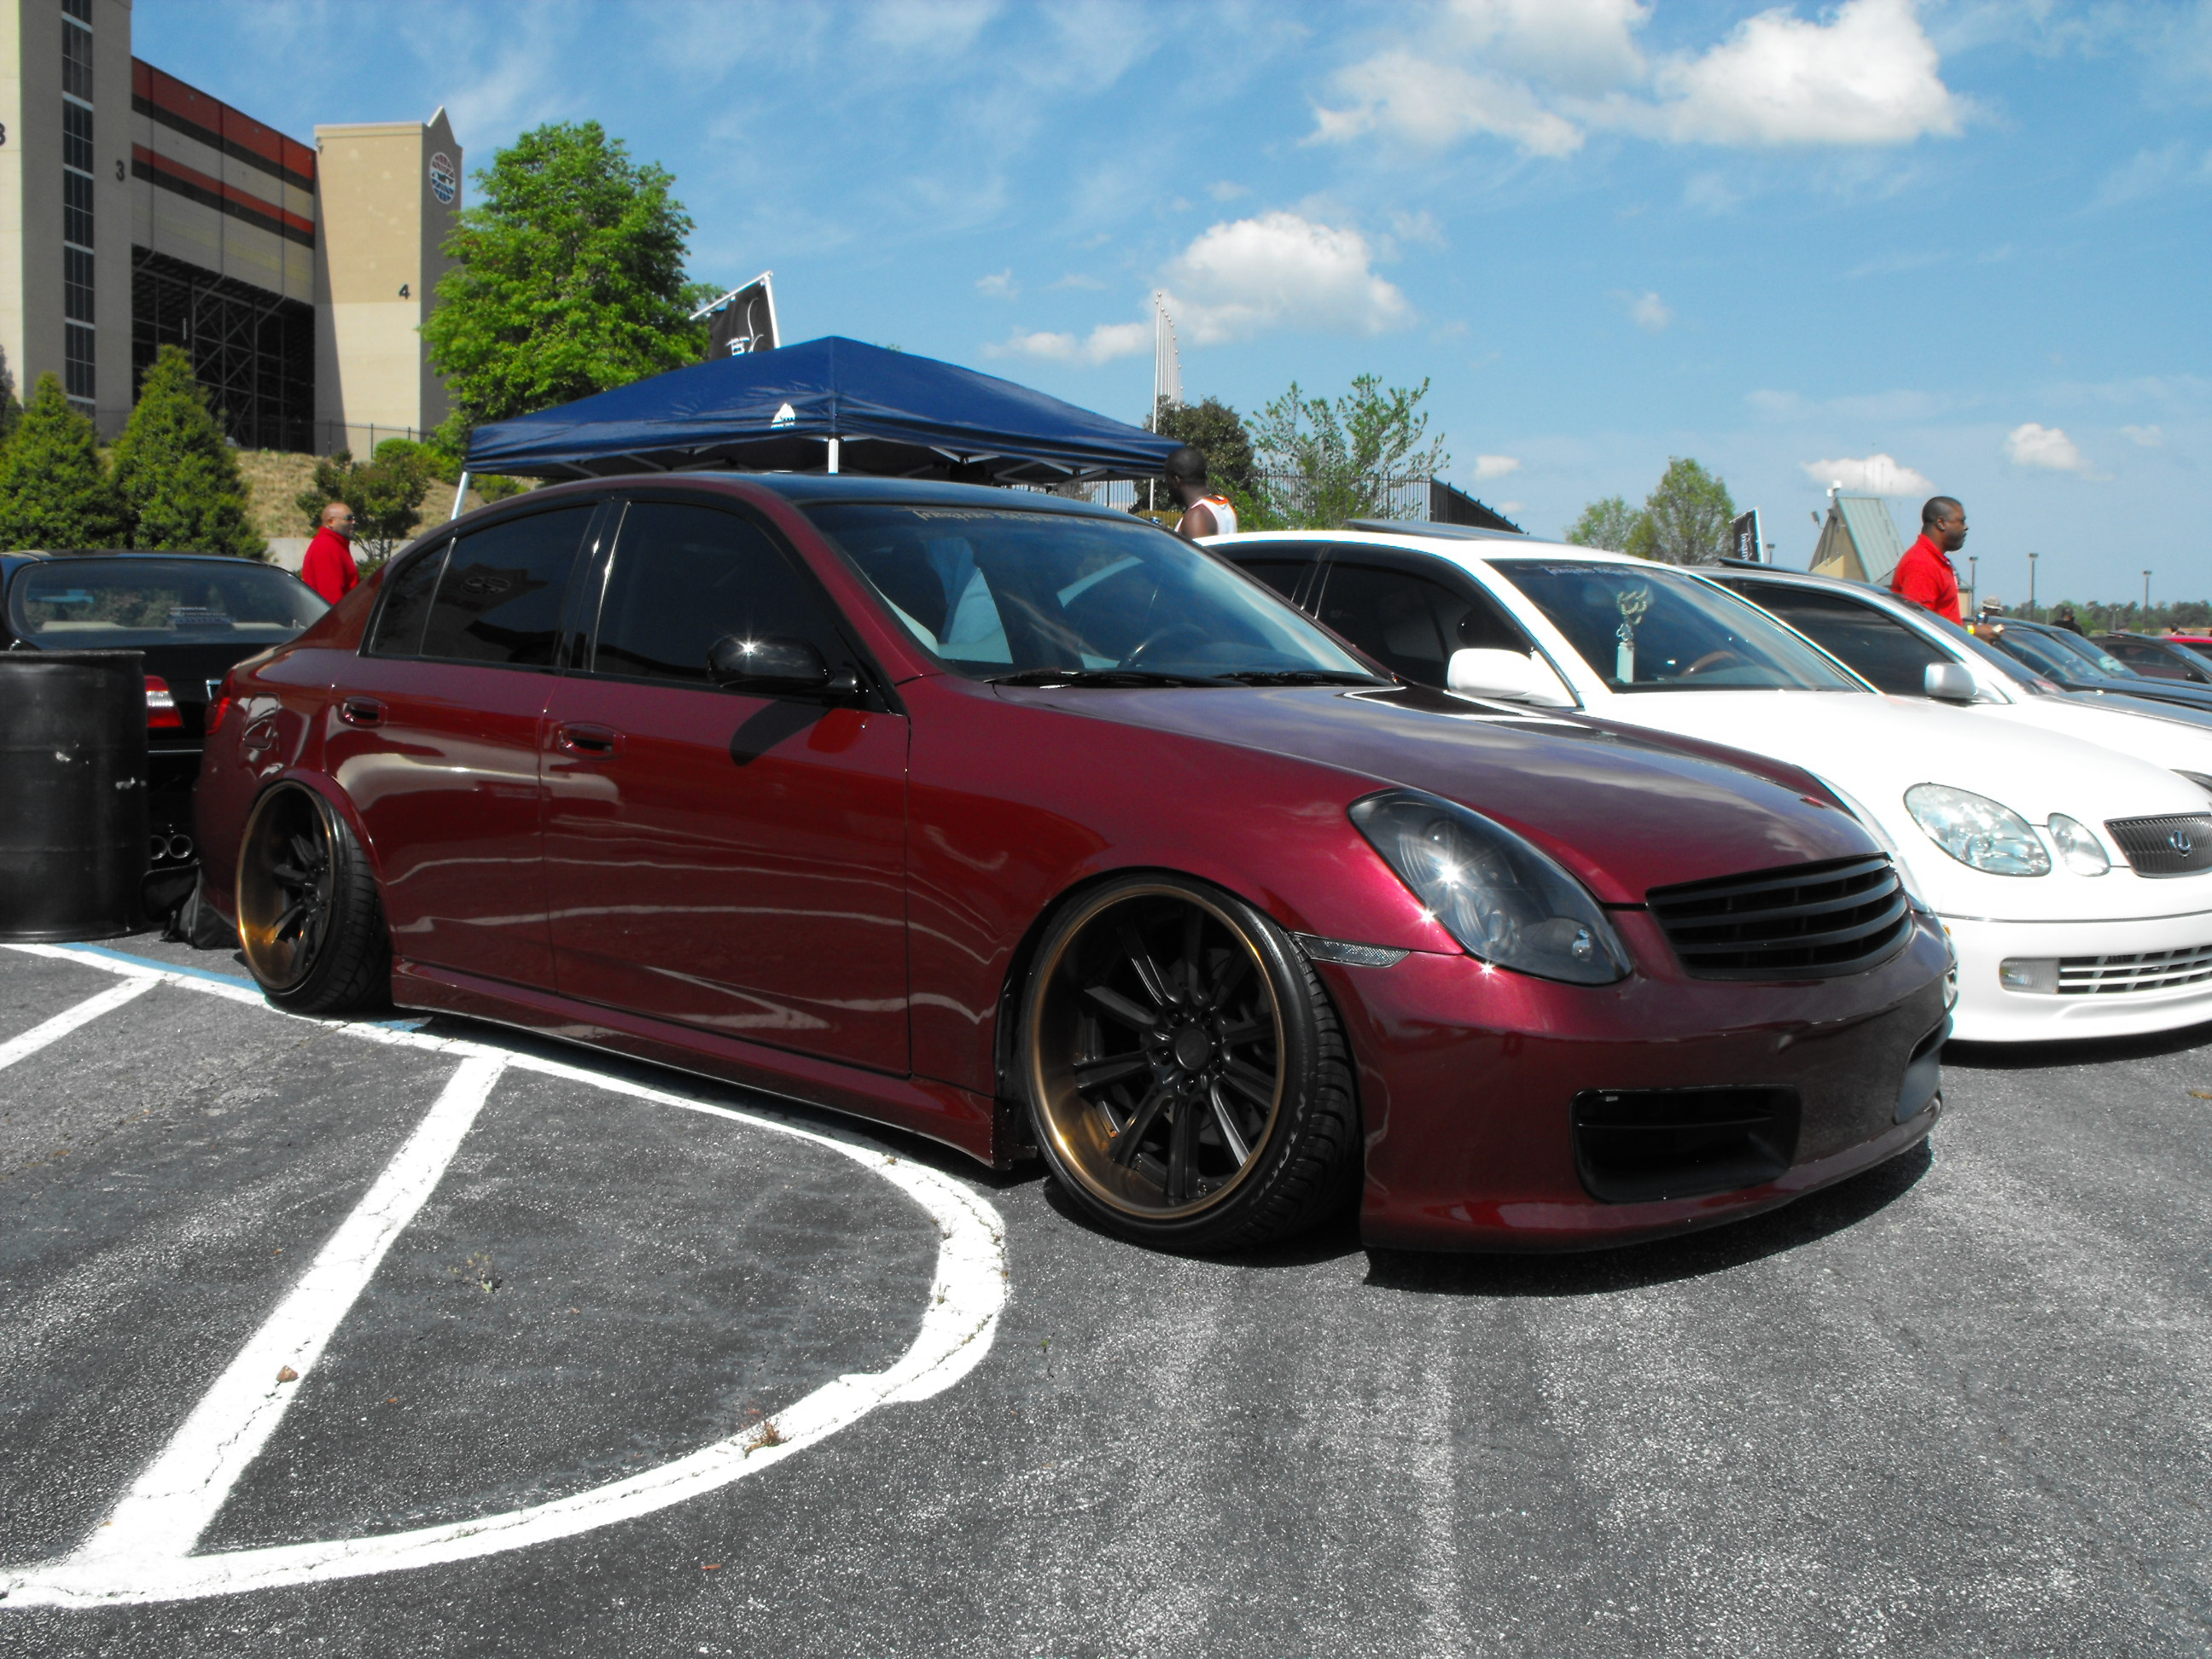 Burgundy paint and bronze lips make this wheel choice pop on this G35